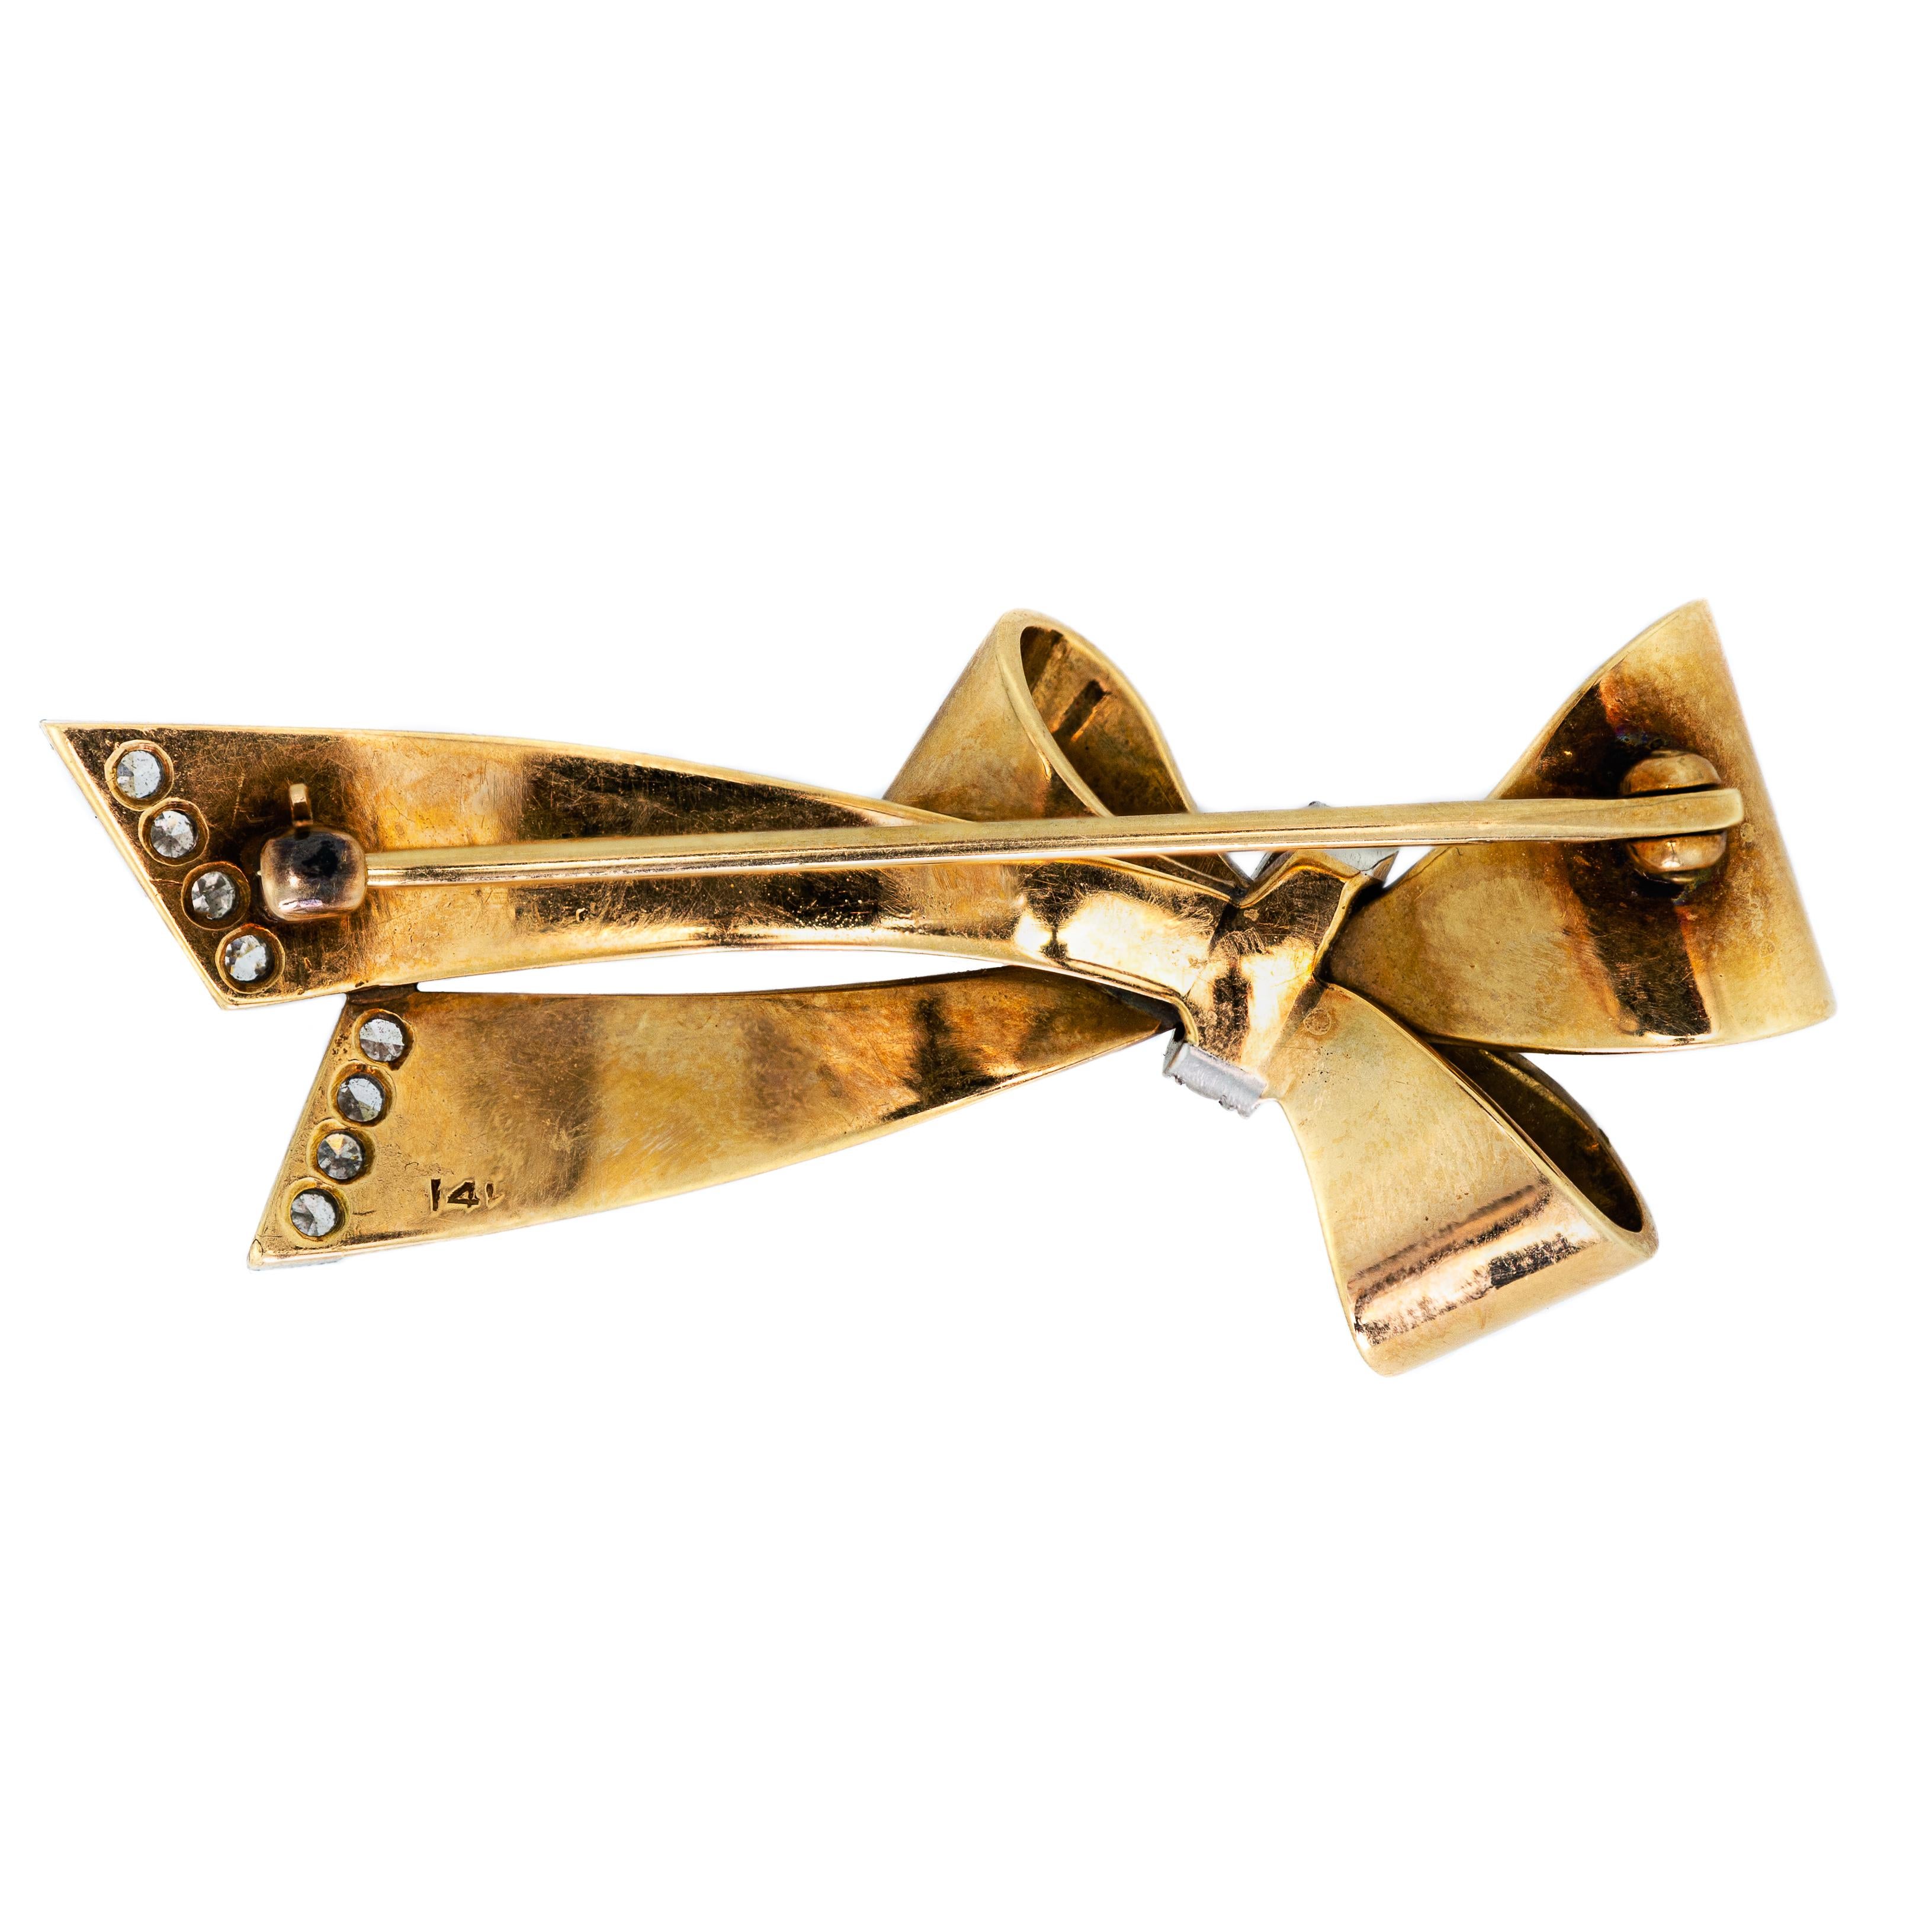 Charming Retro circa 1935 diamond yellow gold stylized bow brooch very pretty neat tailored look - 14kt yellow gold (quality mark reverse) and diamond set with small single cut and full cut round diamonds - Fine detailed gold work - measures